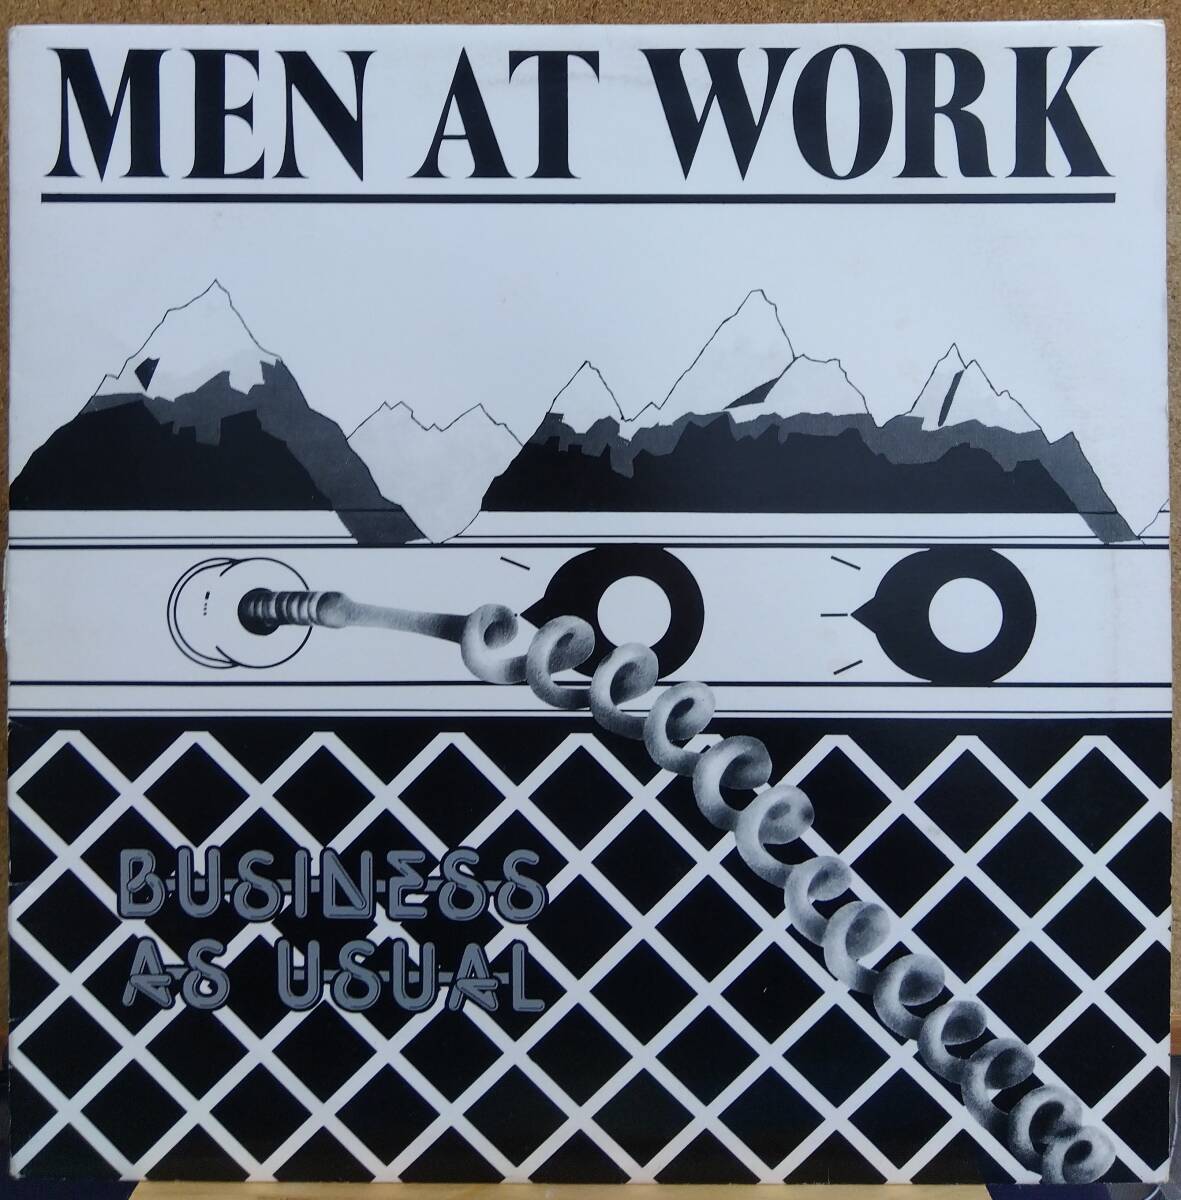 LP(25・3P-379.'82盤.ロック.バンド.ライナー無し)メン・アット・ワーク MAN AT WORK/BUSINESS AS USUAL【同梱可能６枚まで】060310_画像1